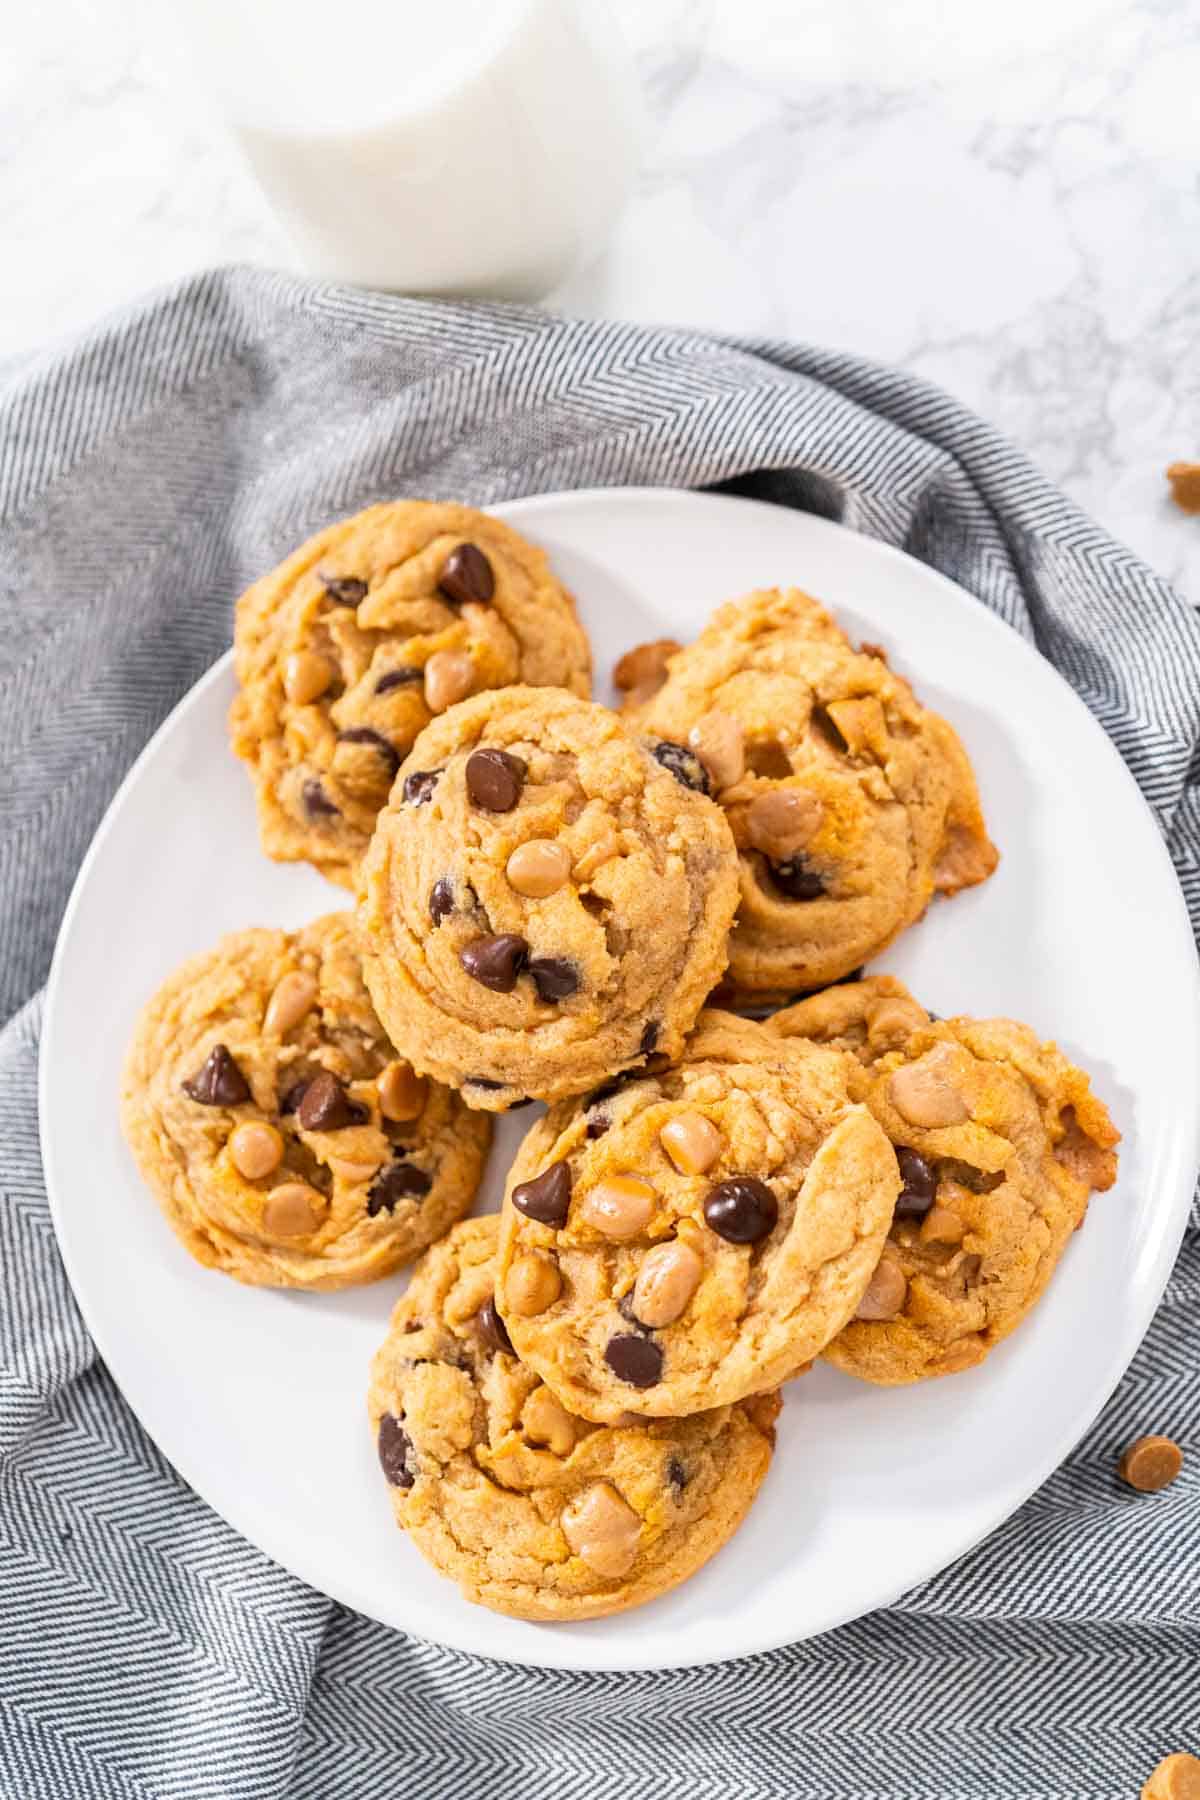 Chocolate chip butterscotch cookies on a white plate with a gray napkin.